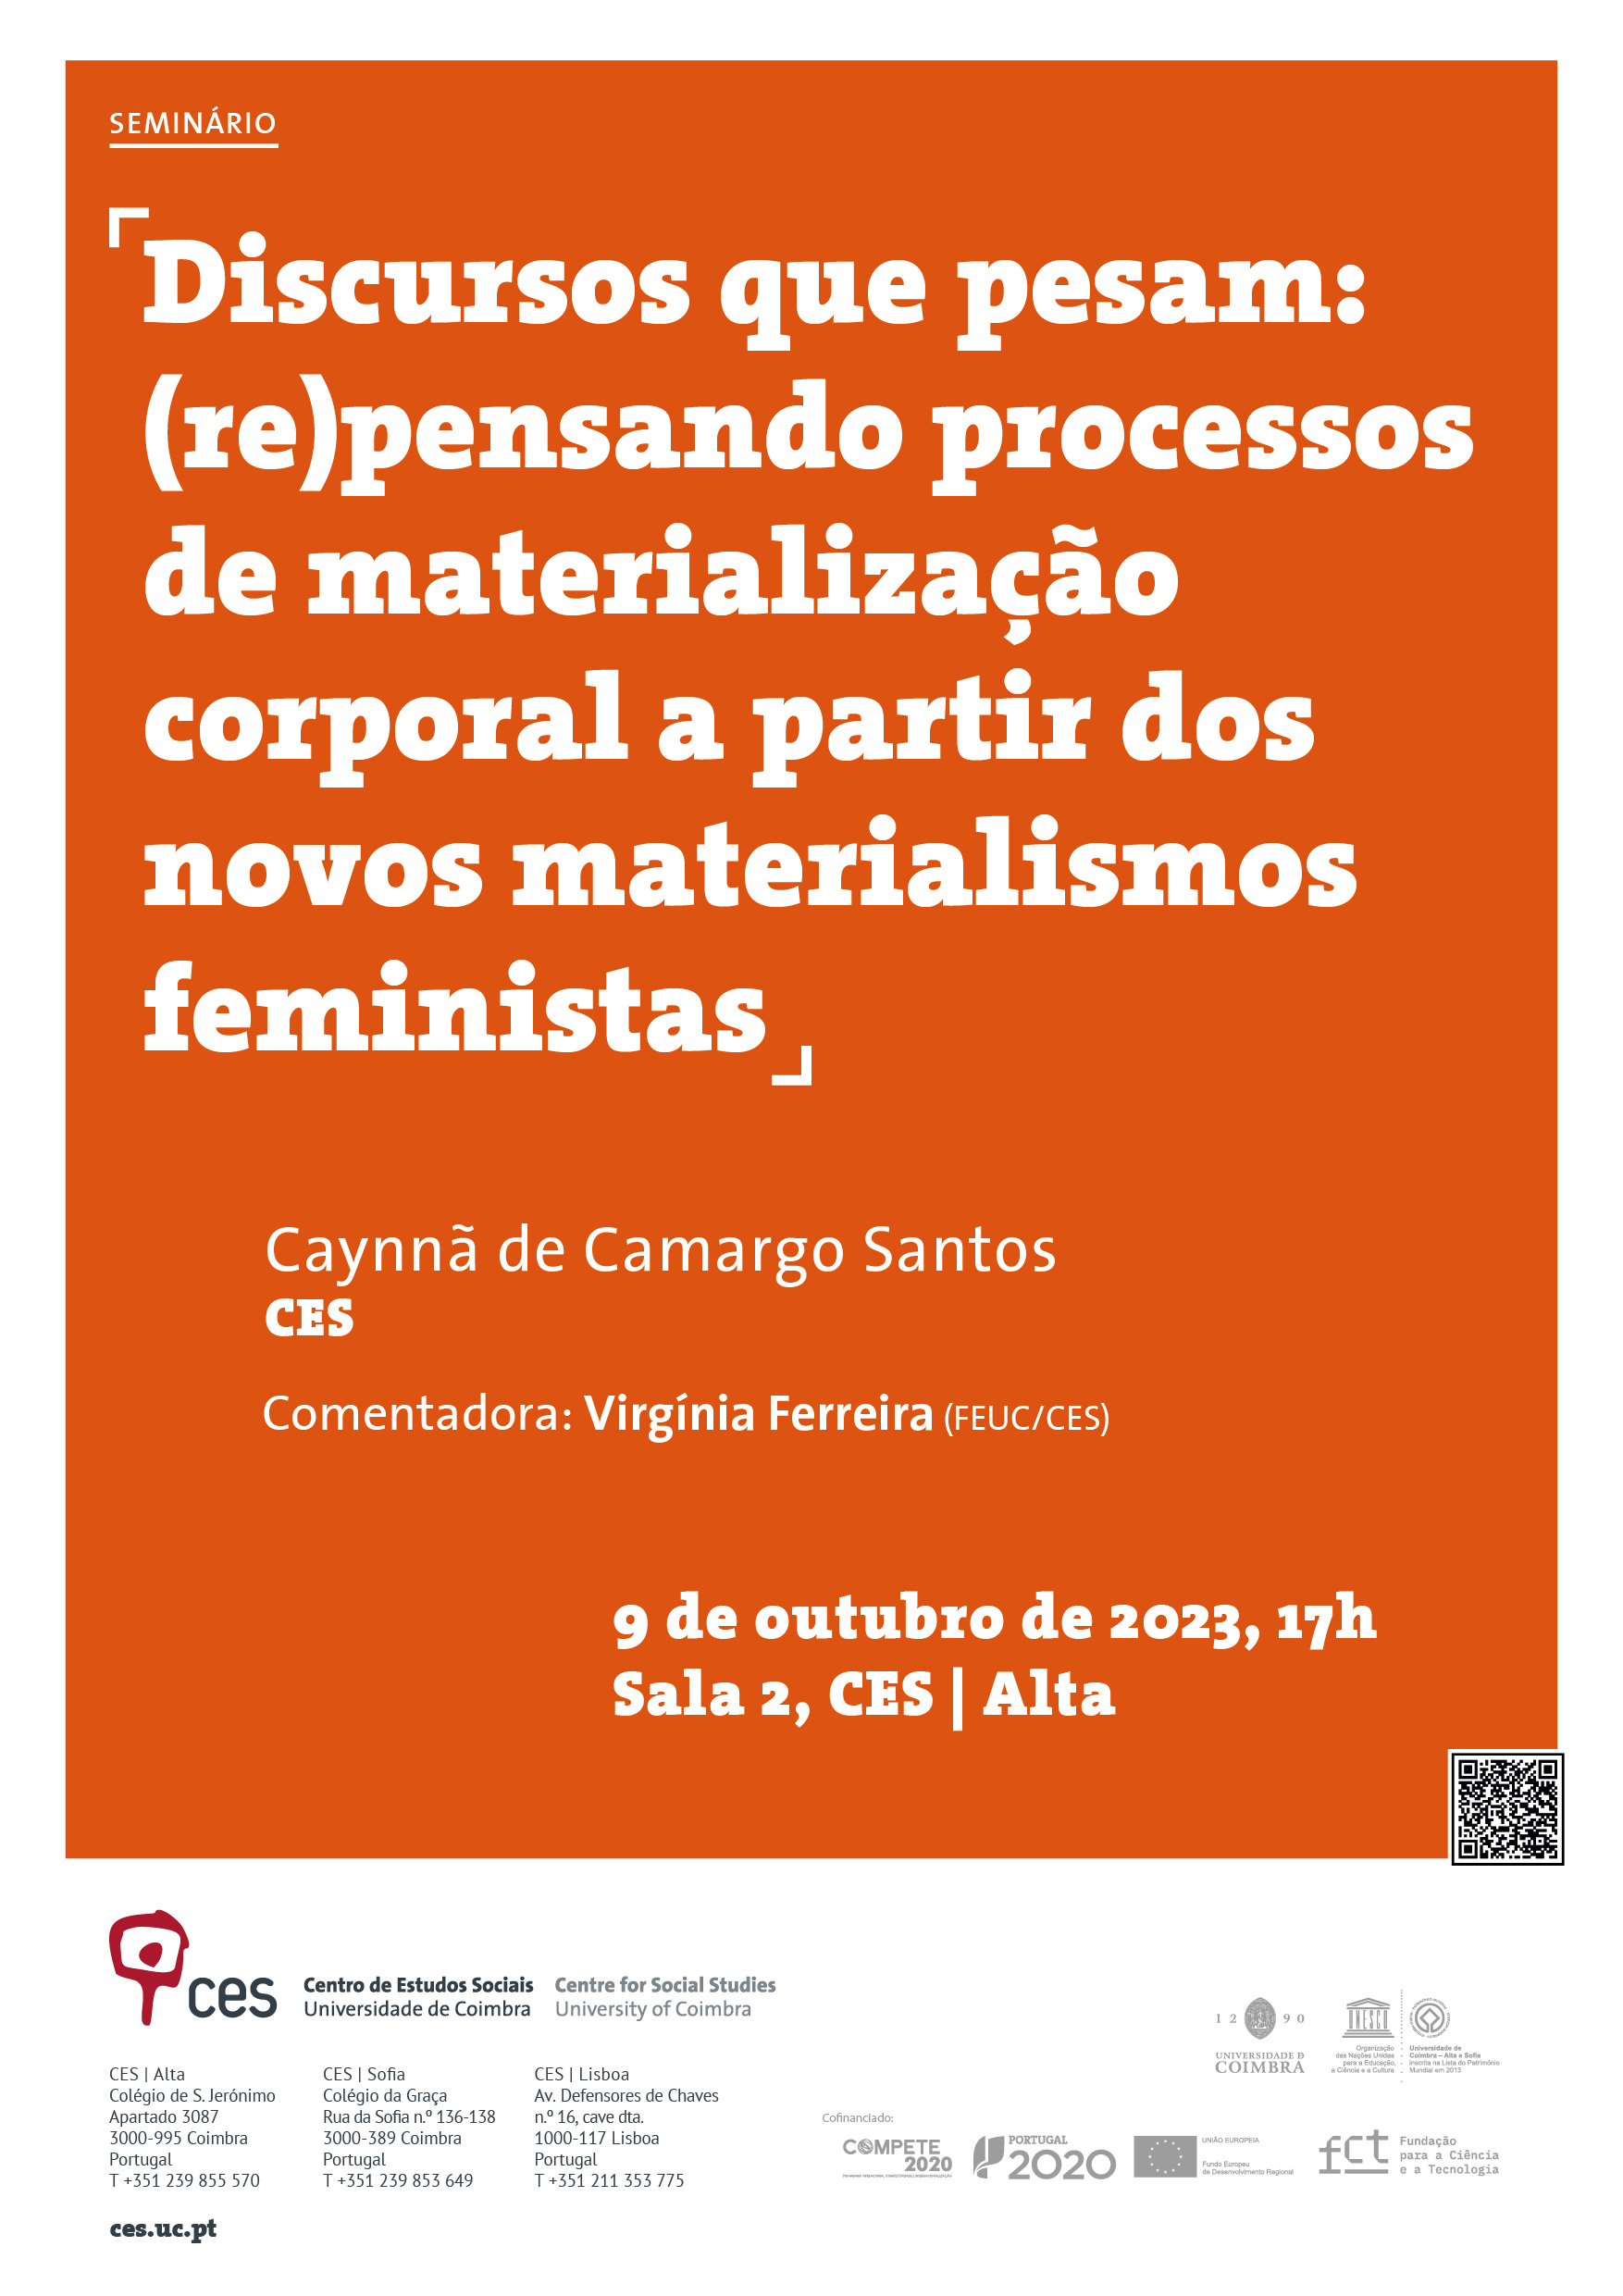 Discourses that weigh: (re)thinking processes of bodily materialisation based on new feminist materialisms<span id="edit_44032"><script>$(function() { $('#edit_44032').load( "/myces/user/editobj.php?tipo=evento&id=44032" ); });</script></span>